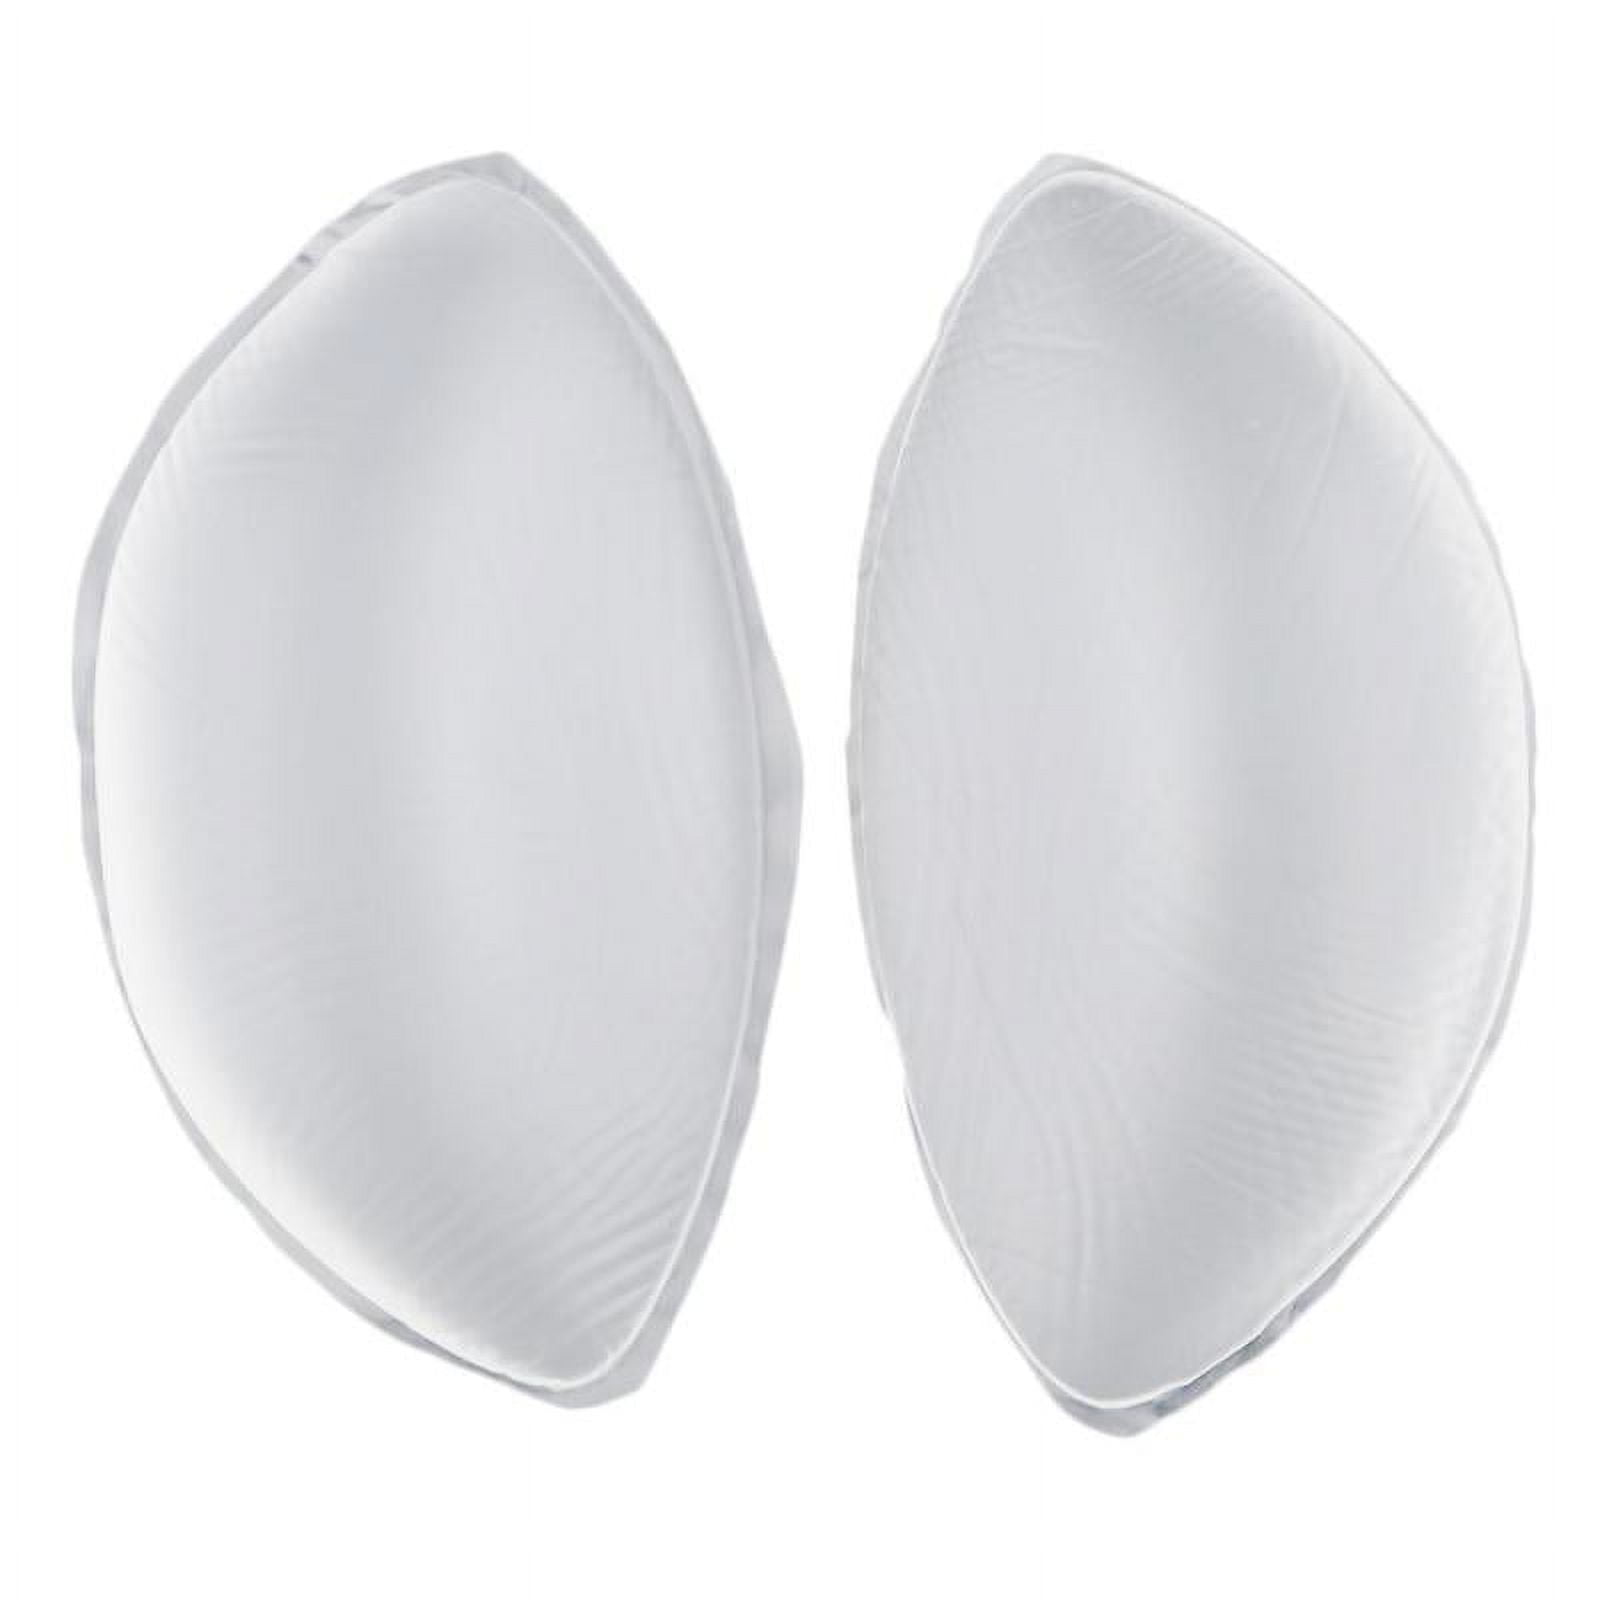 Vollence D Cup 1000g Silicone Breast Forms Fake Boobs Artificial